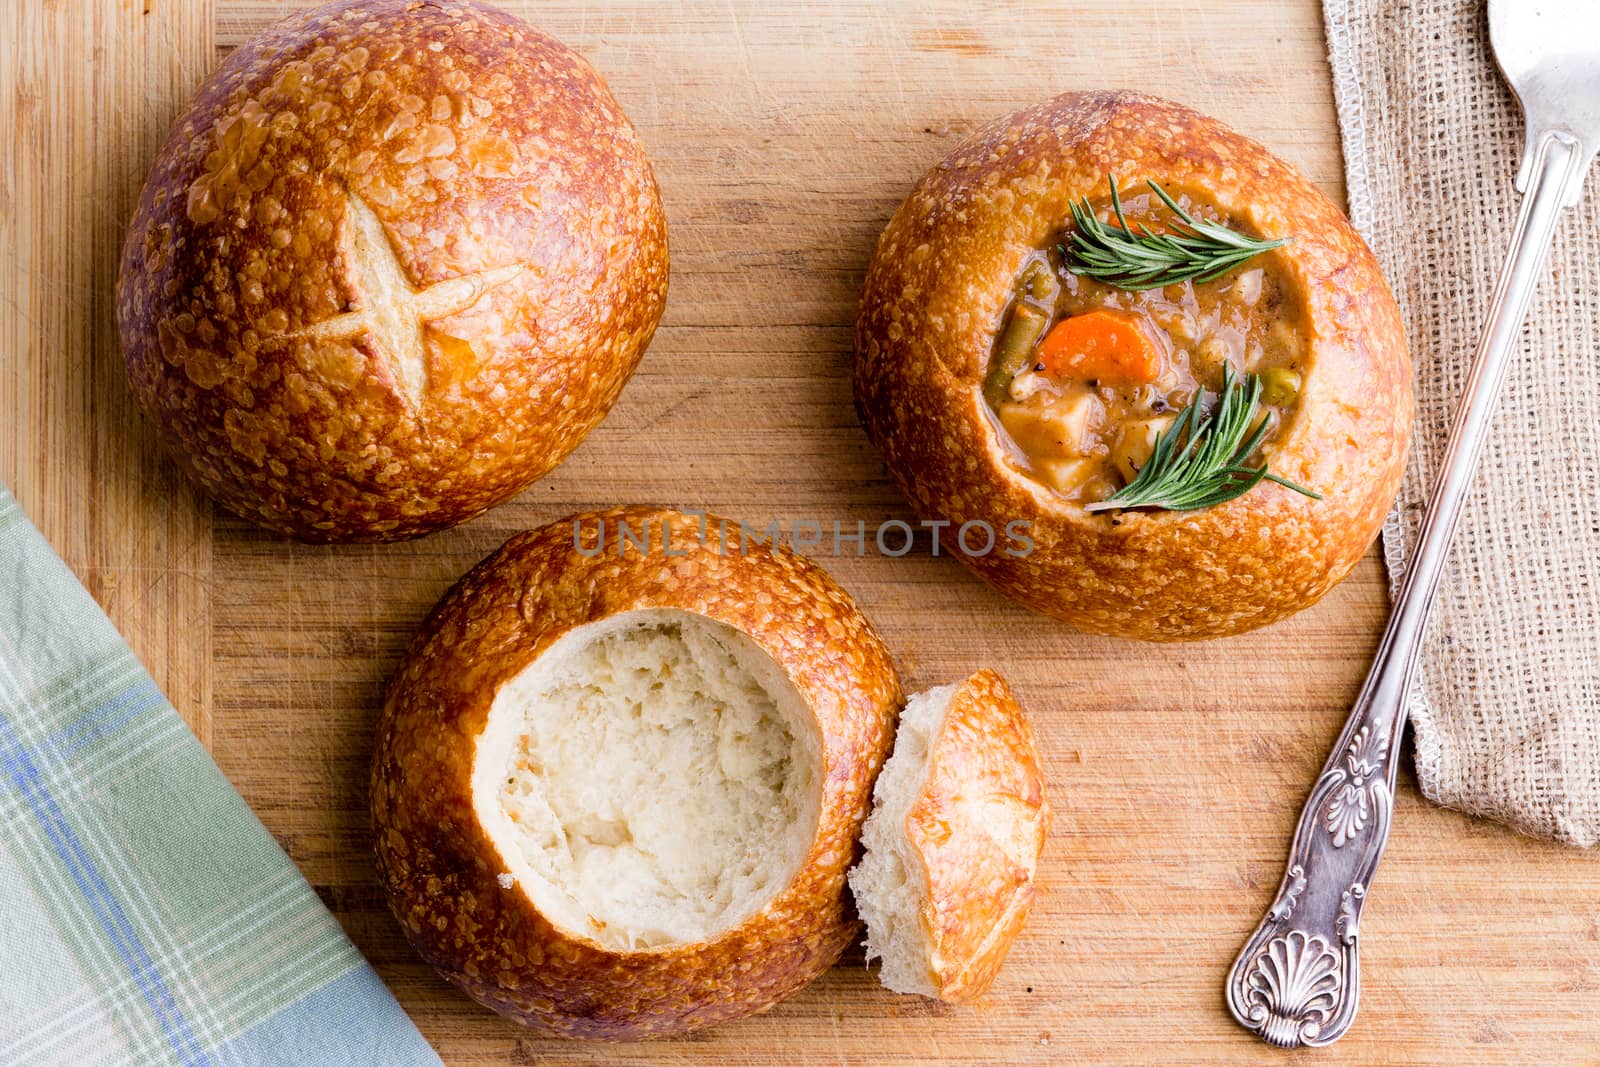 Stages in serving fresh vegetable soup in a sourdough bread bowl showing the whole bun, hollowed out and with the soup served in it, overhead view